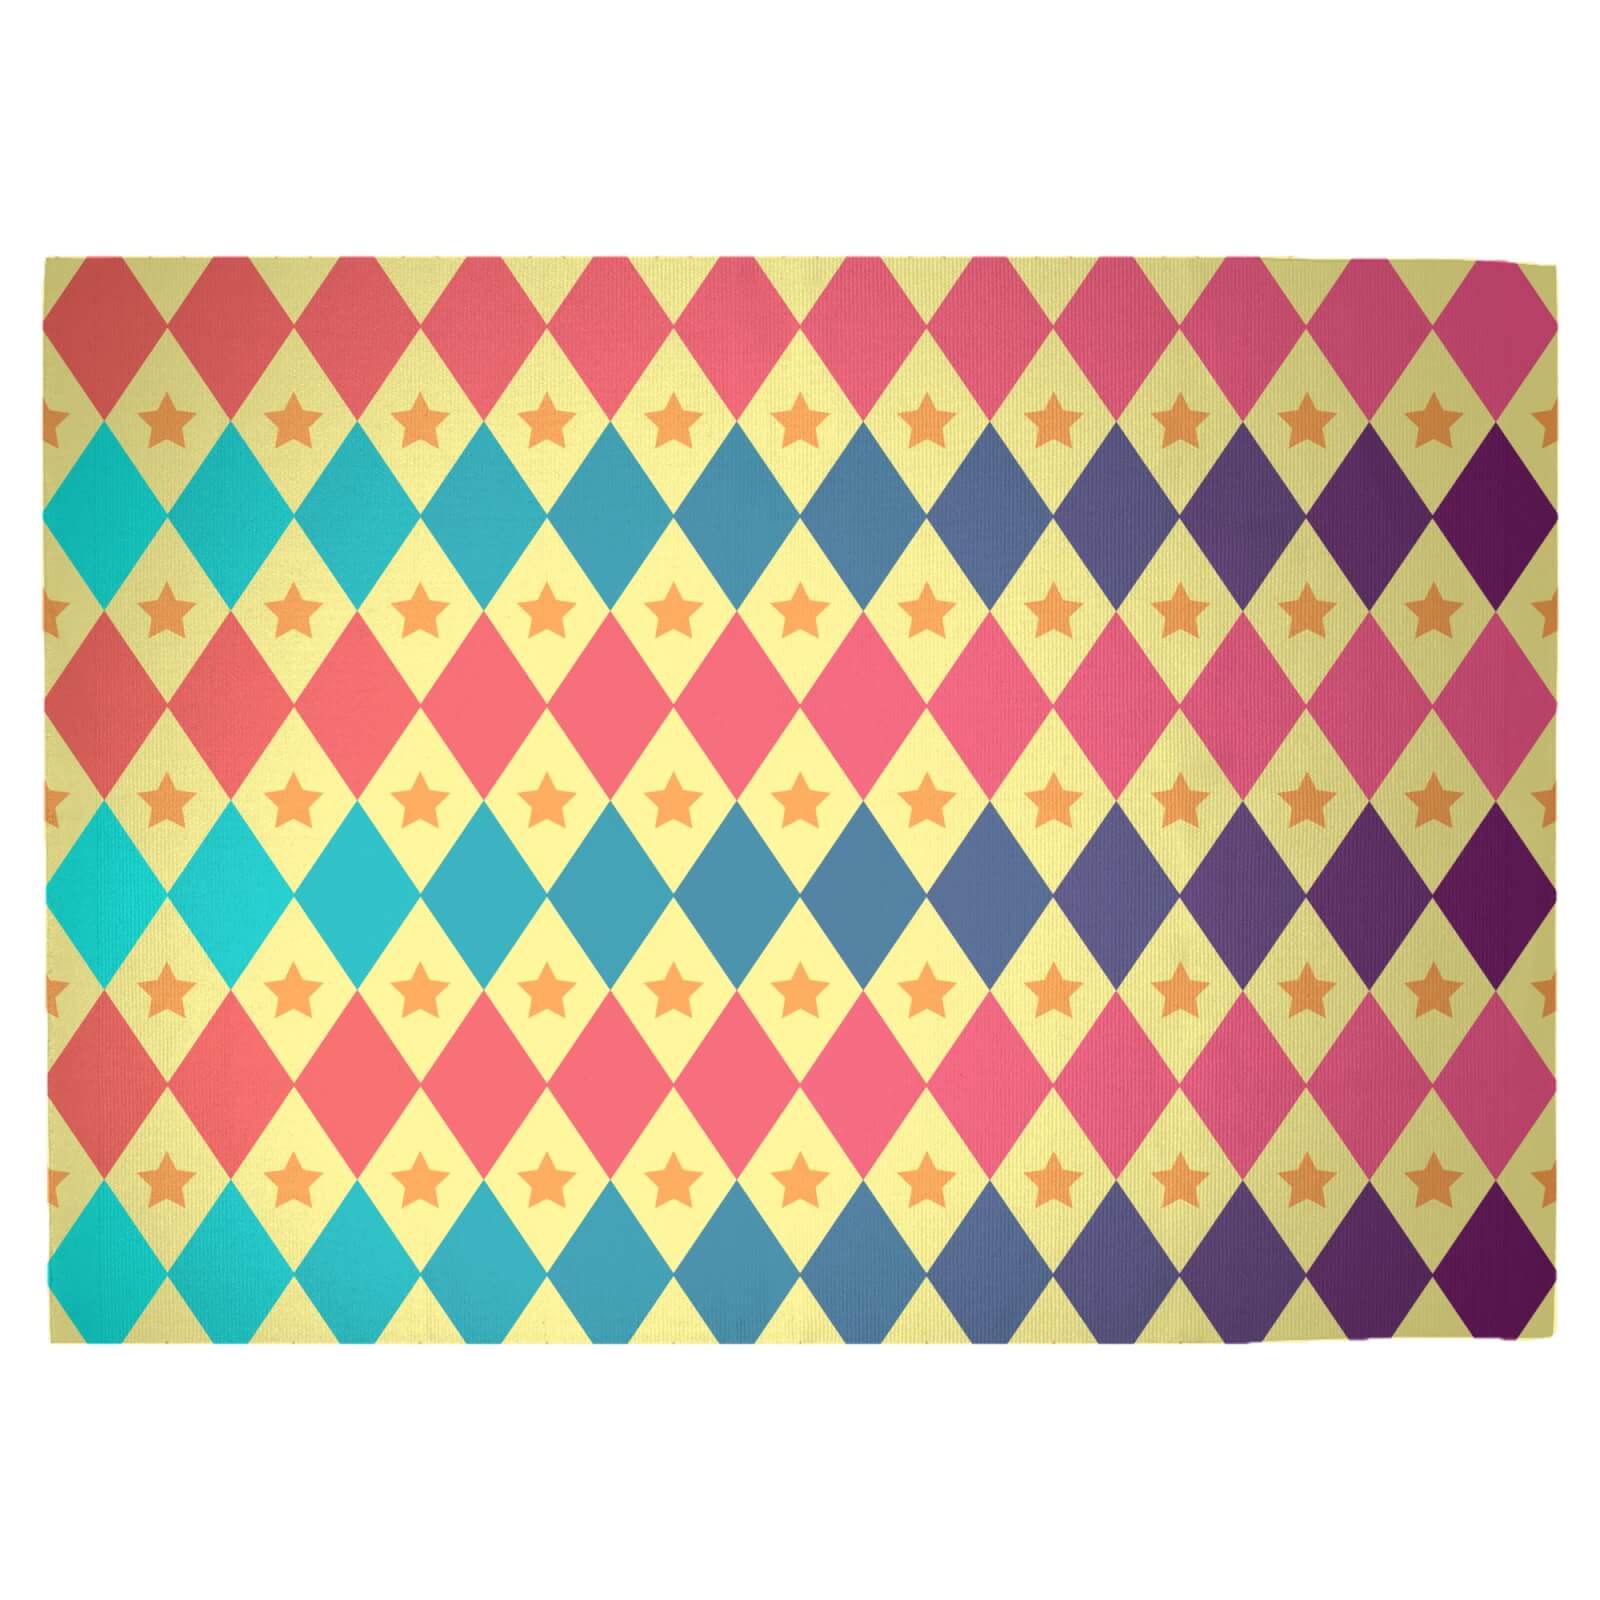 Big Top Pattern Woven Rug - Large